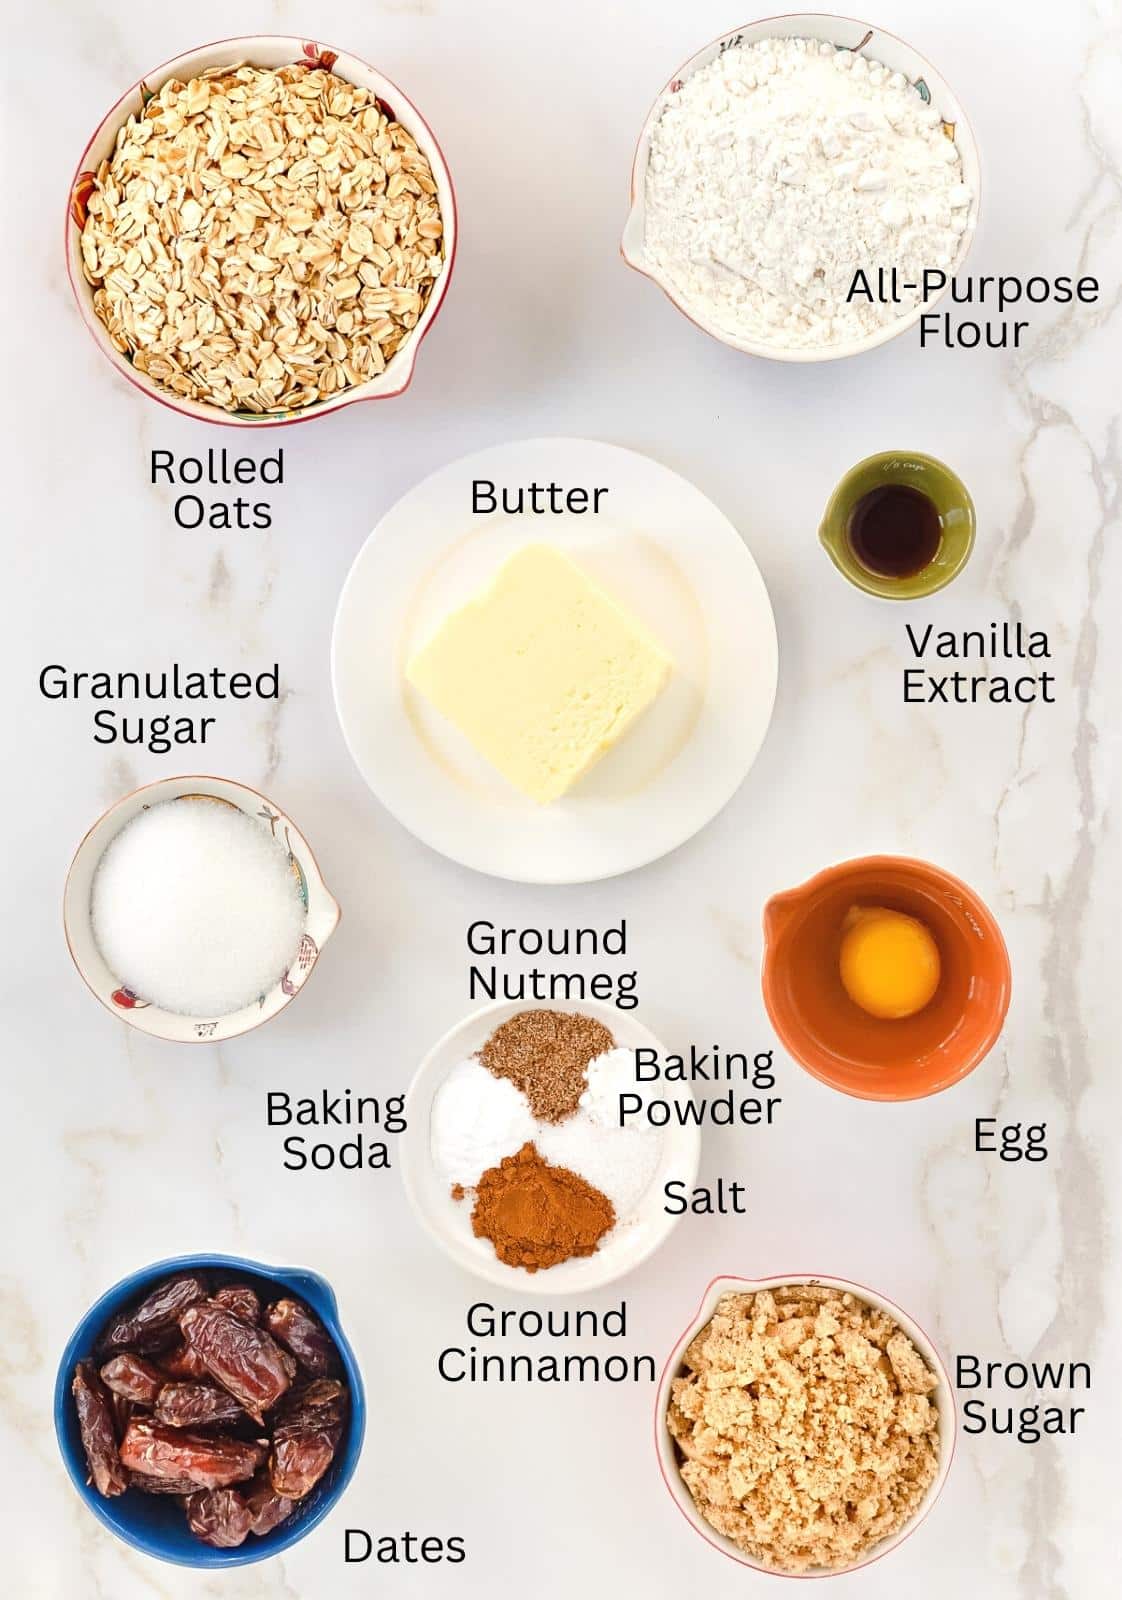 Image of ingredients needed to make, thick, soft and chewy Oatmeal Date Cookies.